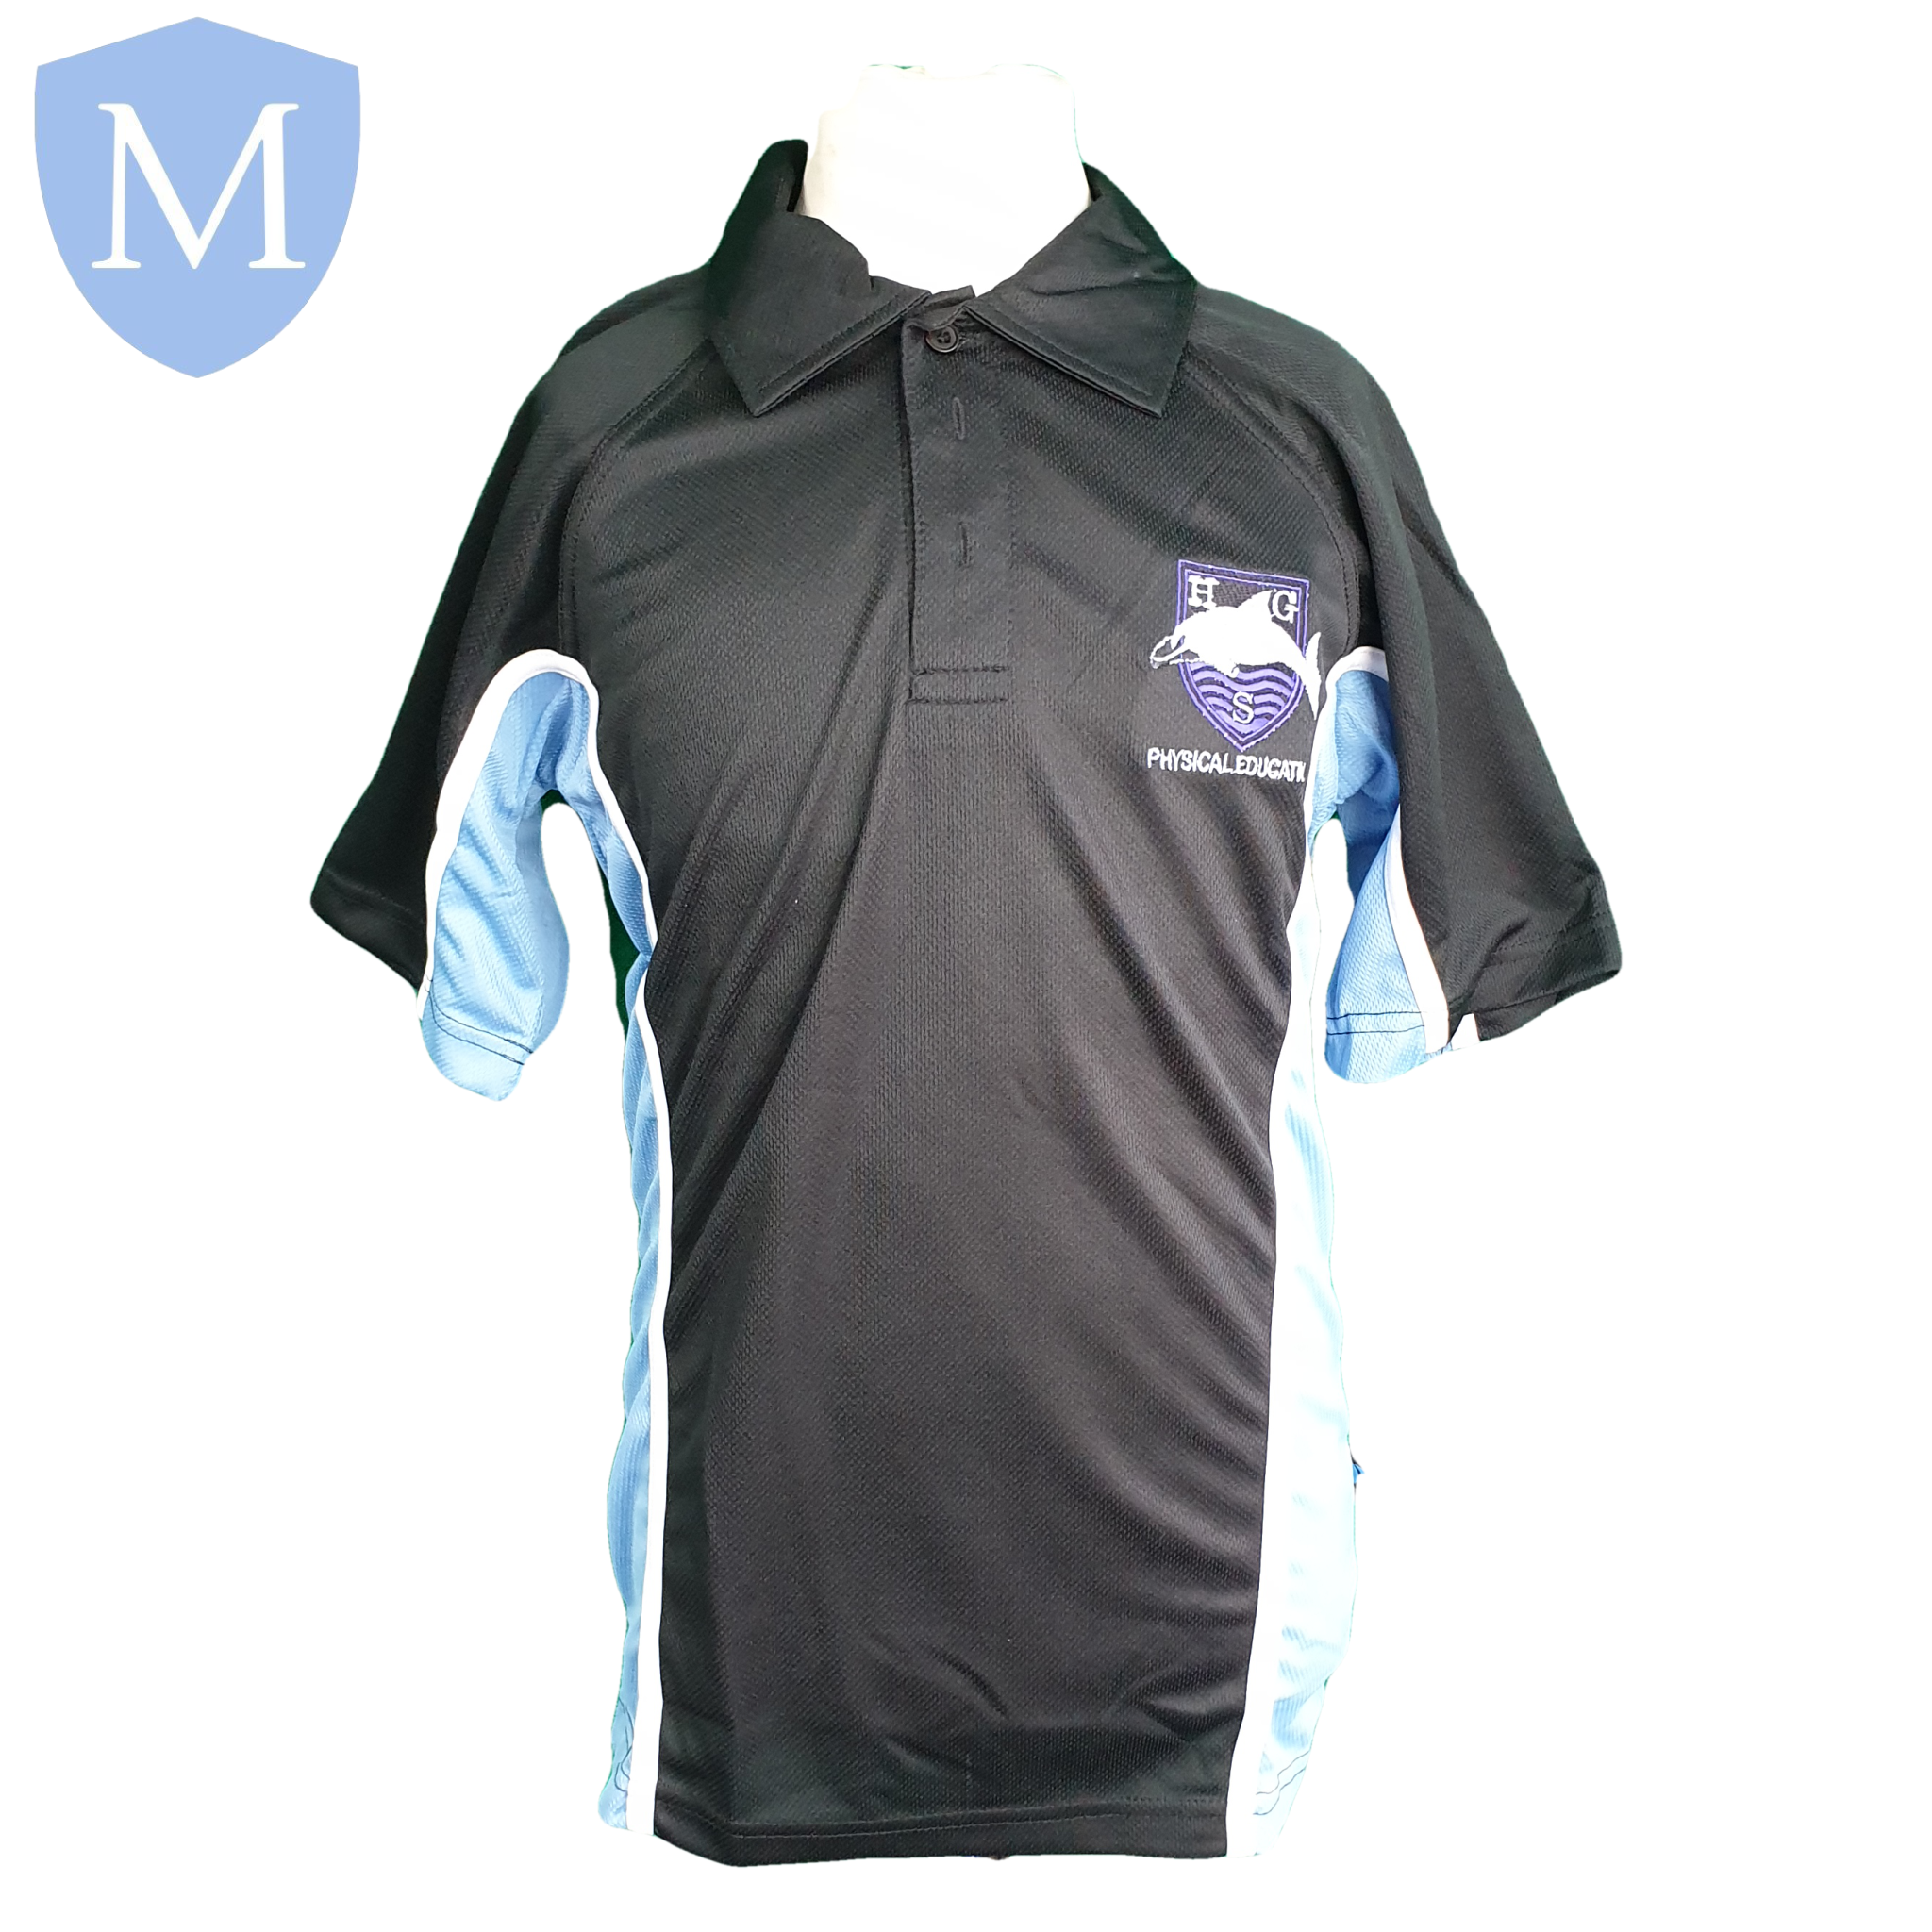 Hall Green Secondary Sports Polo - Blue (Unisex) 30-32 (XS - 12 Years),32-34 (Small - 13 Years),34-36 (Medium - 14 Years),38-40 (large 15-16 Years),42-44 (X-Large),46-48 (XXL),50-52 (XXXL)